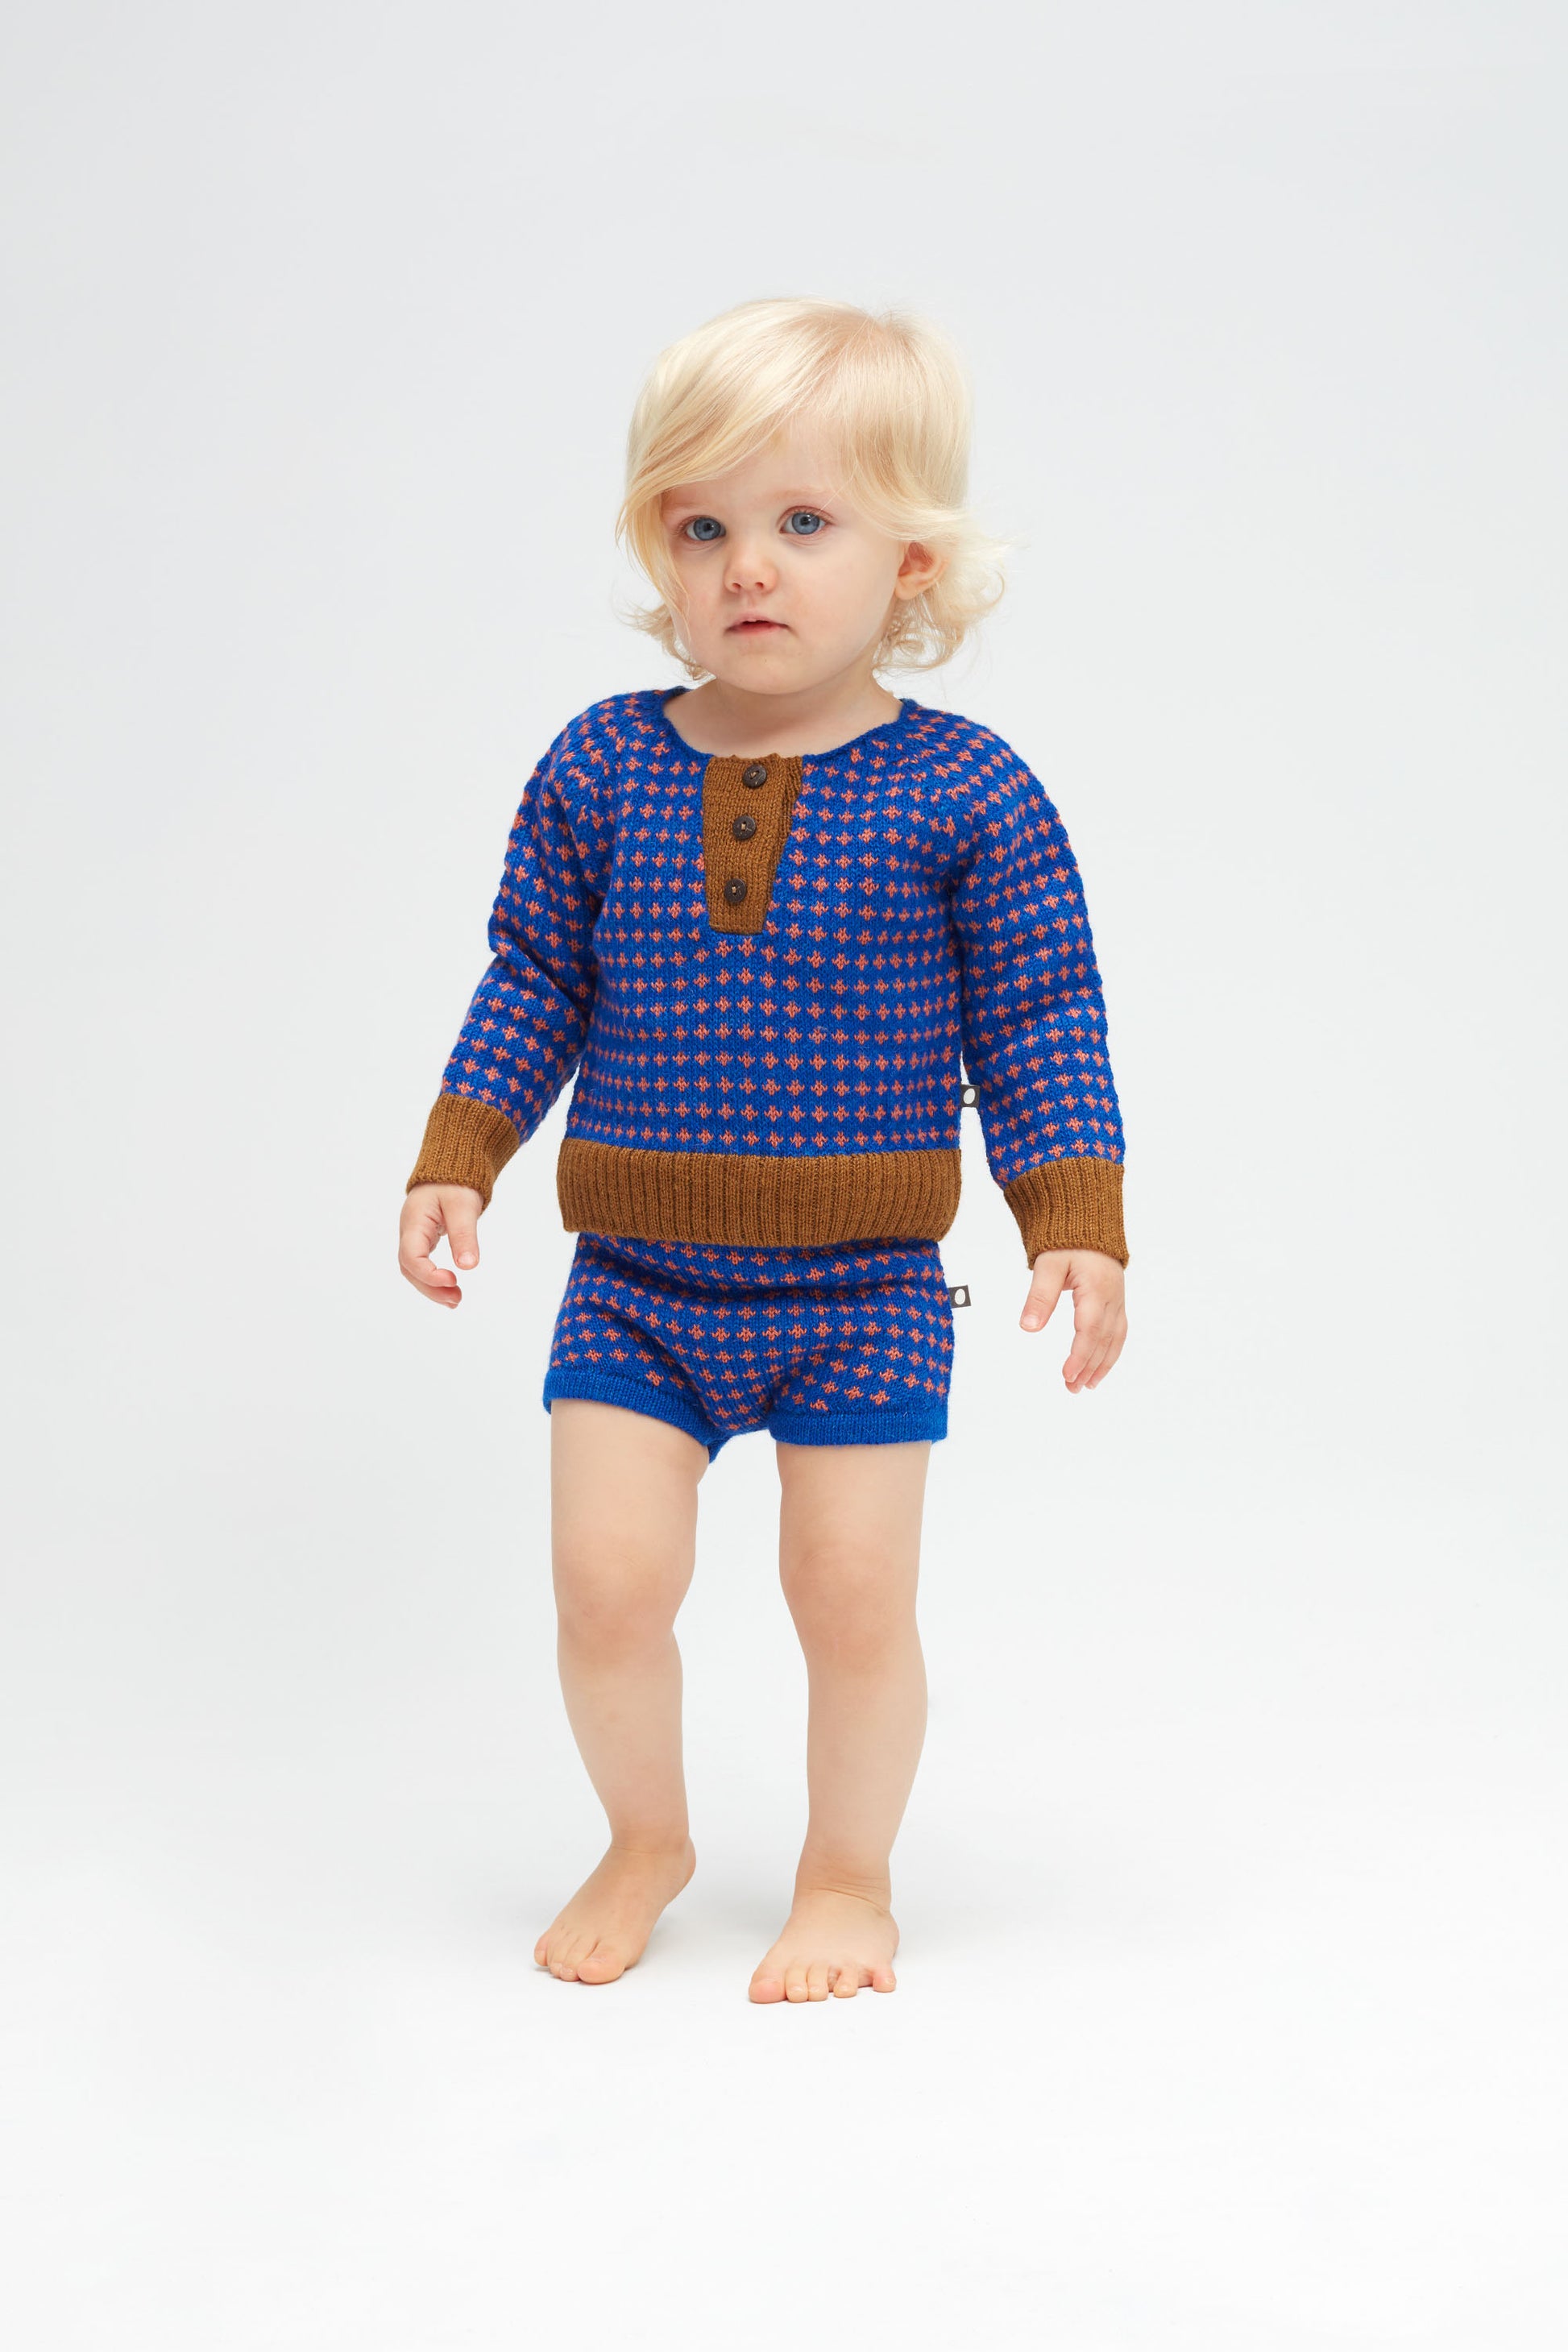 Oeuf Kids bottoms Shorts-Electric Blue/Apricot - Ever Simplicity